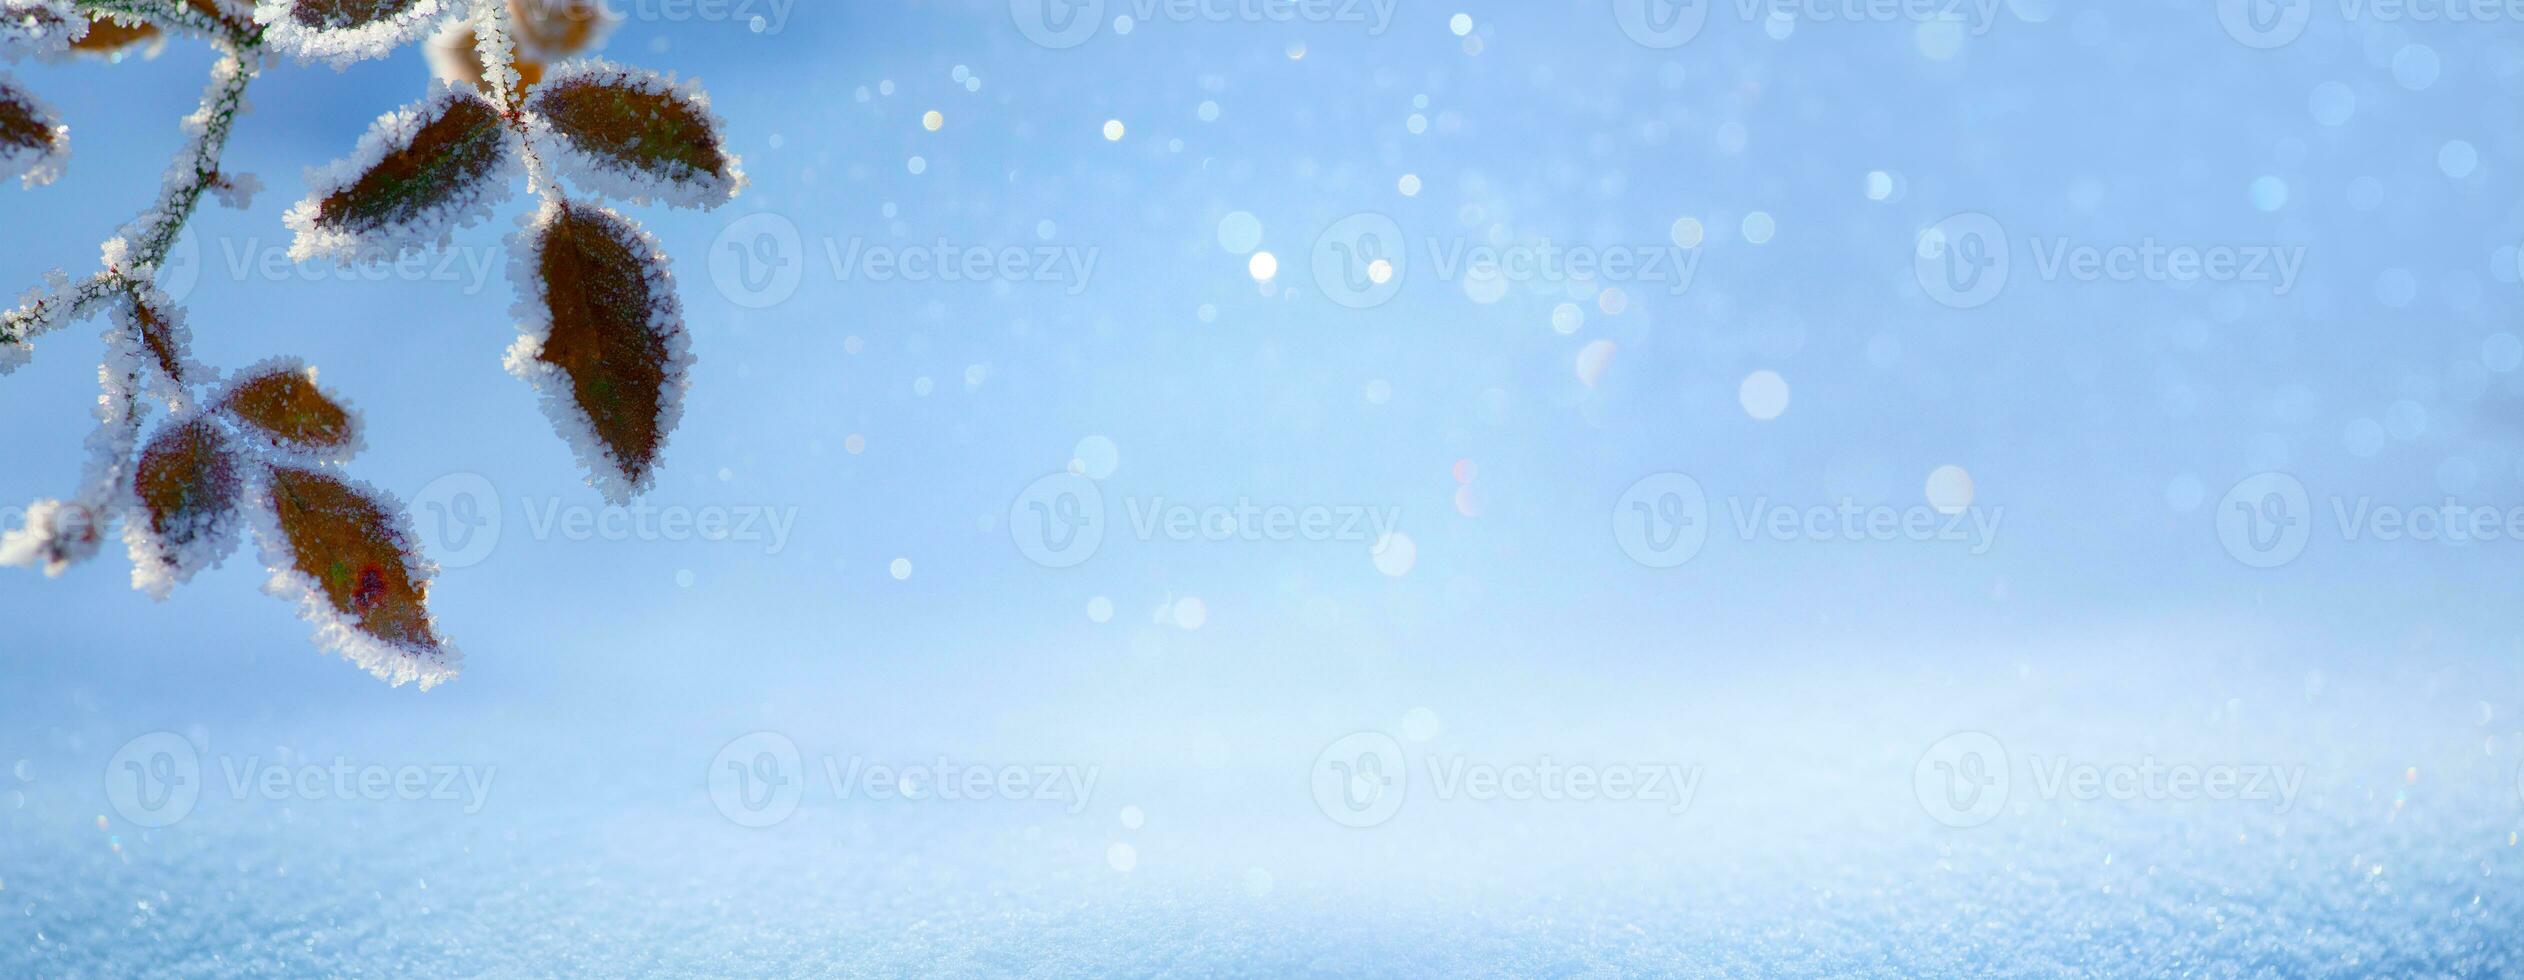 Frosty winter landscape in a snowy forest. Christmas background with tree branch and blurred snowy winter background. photo